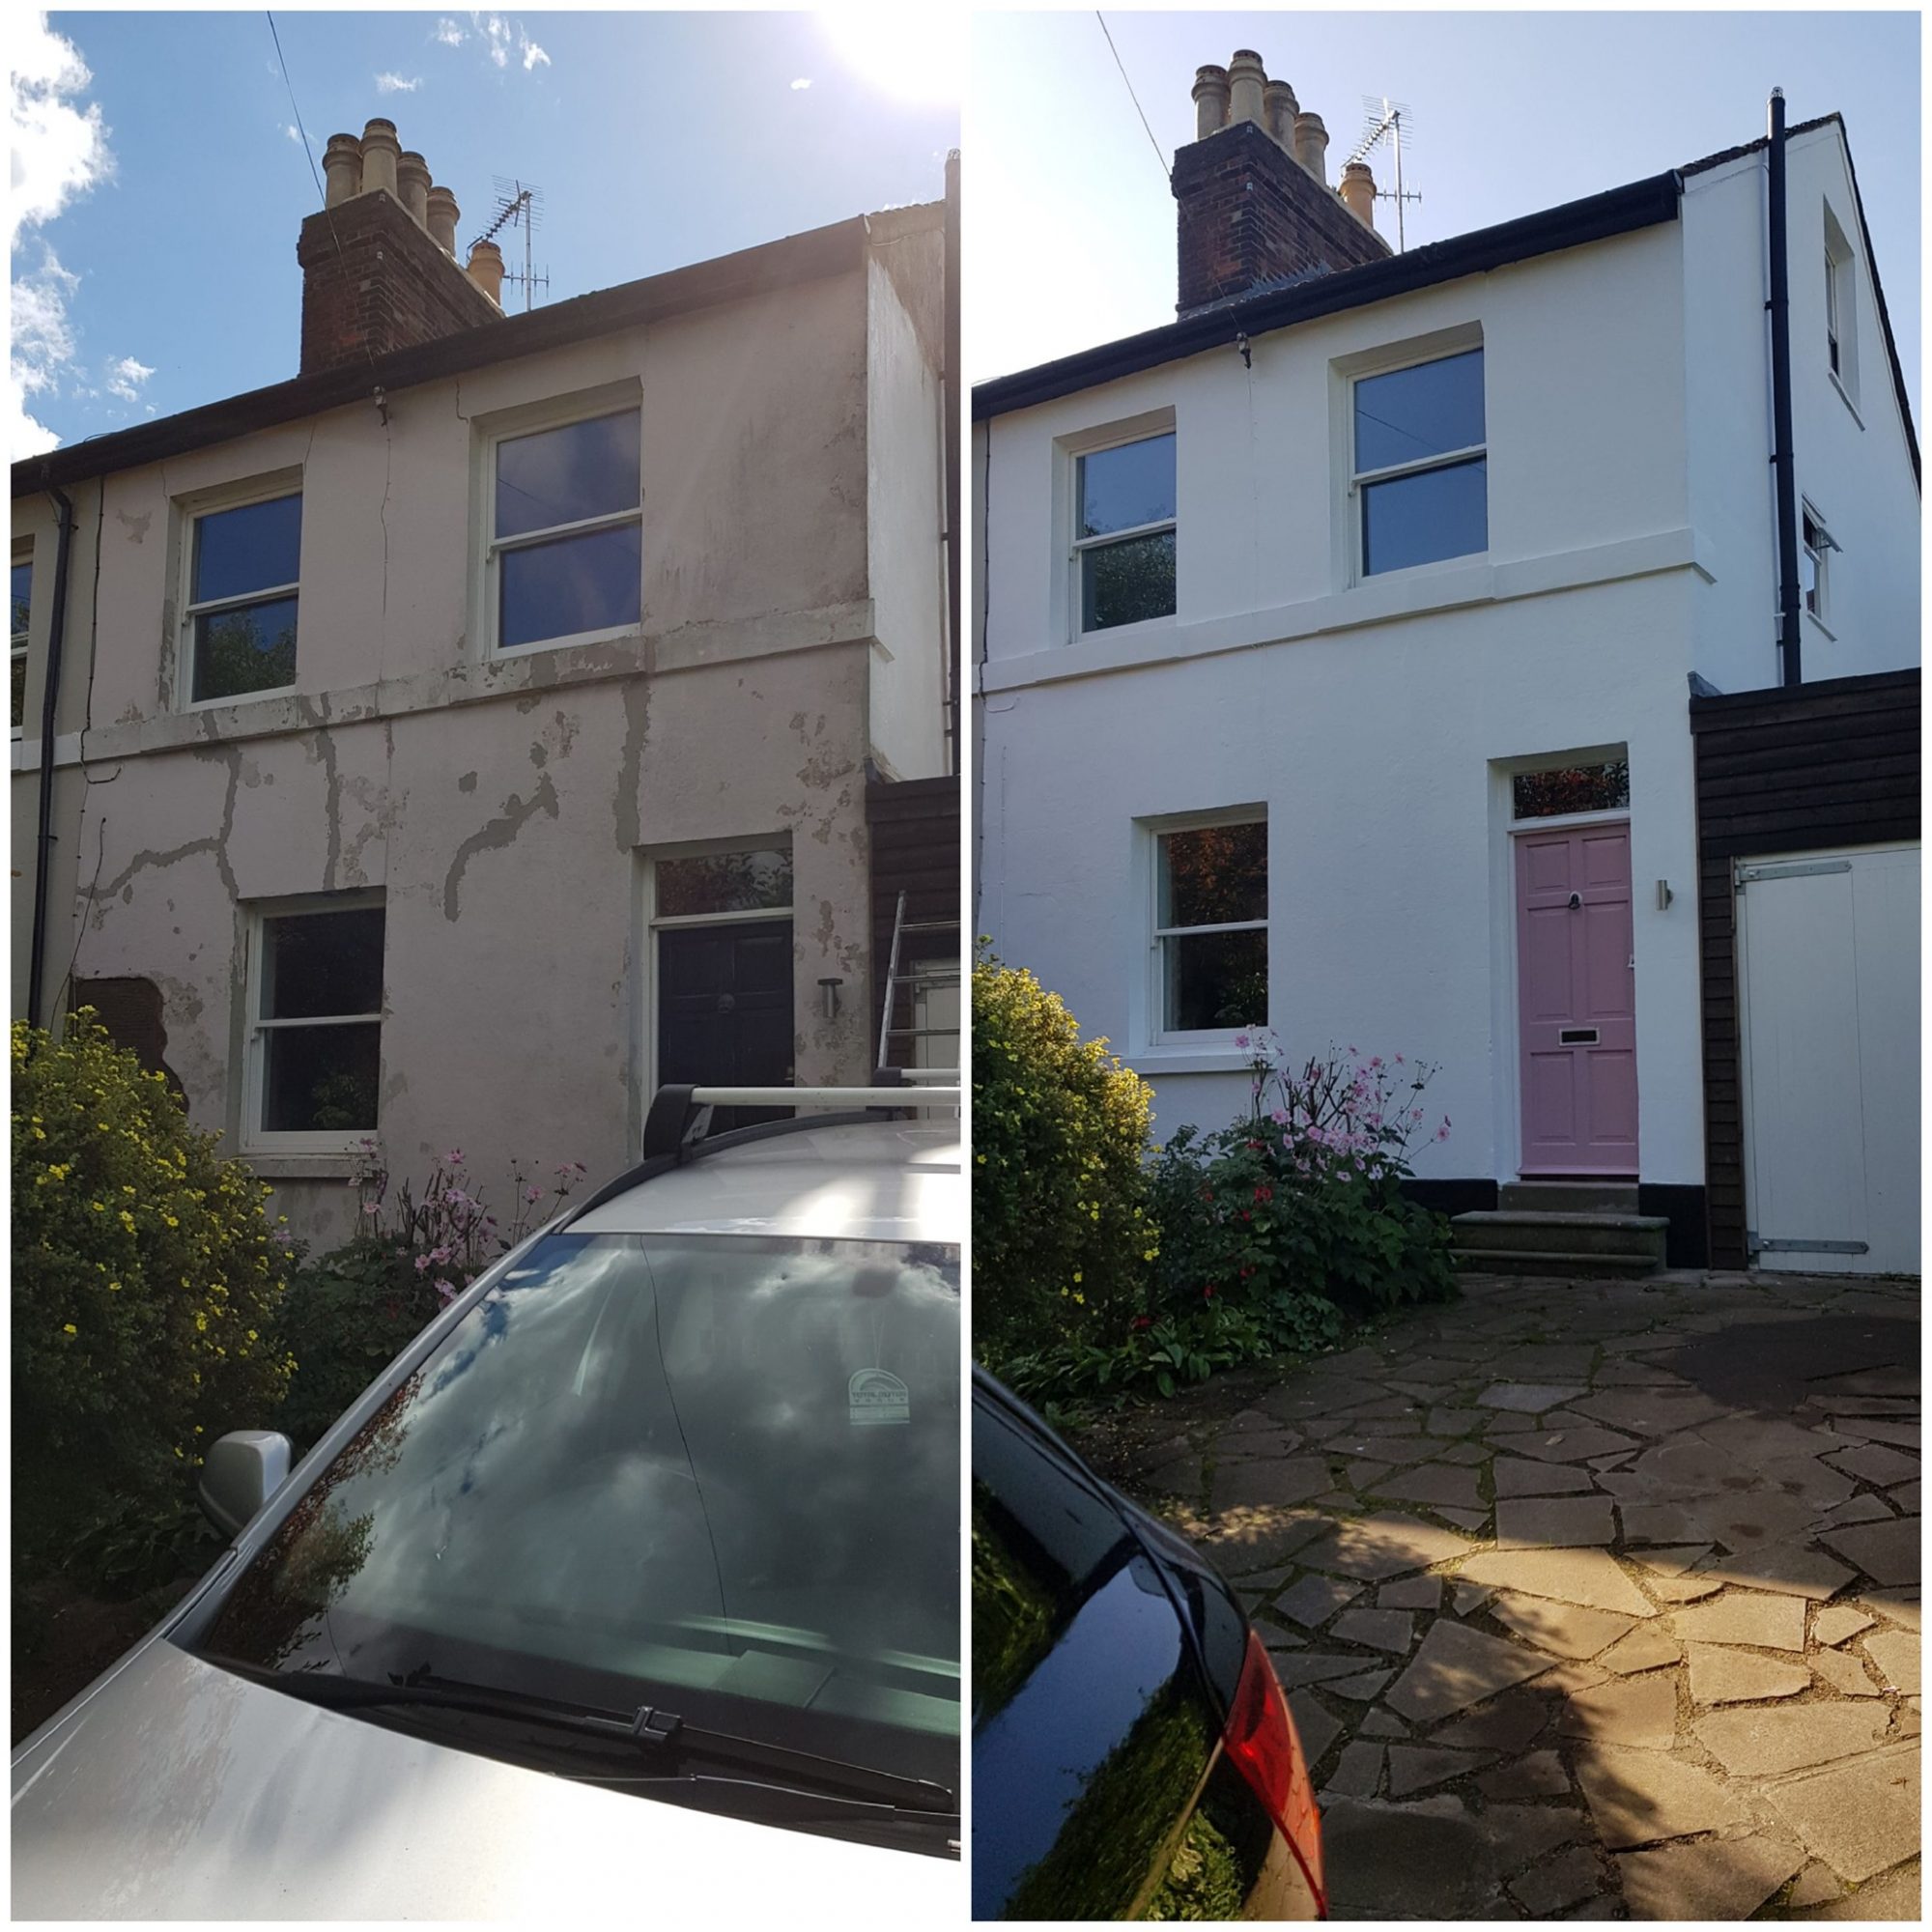 House repairs in st albans